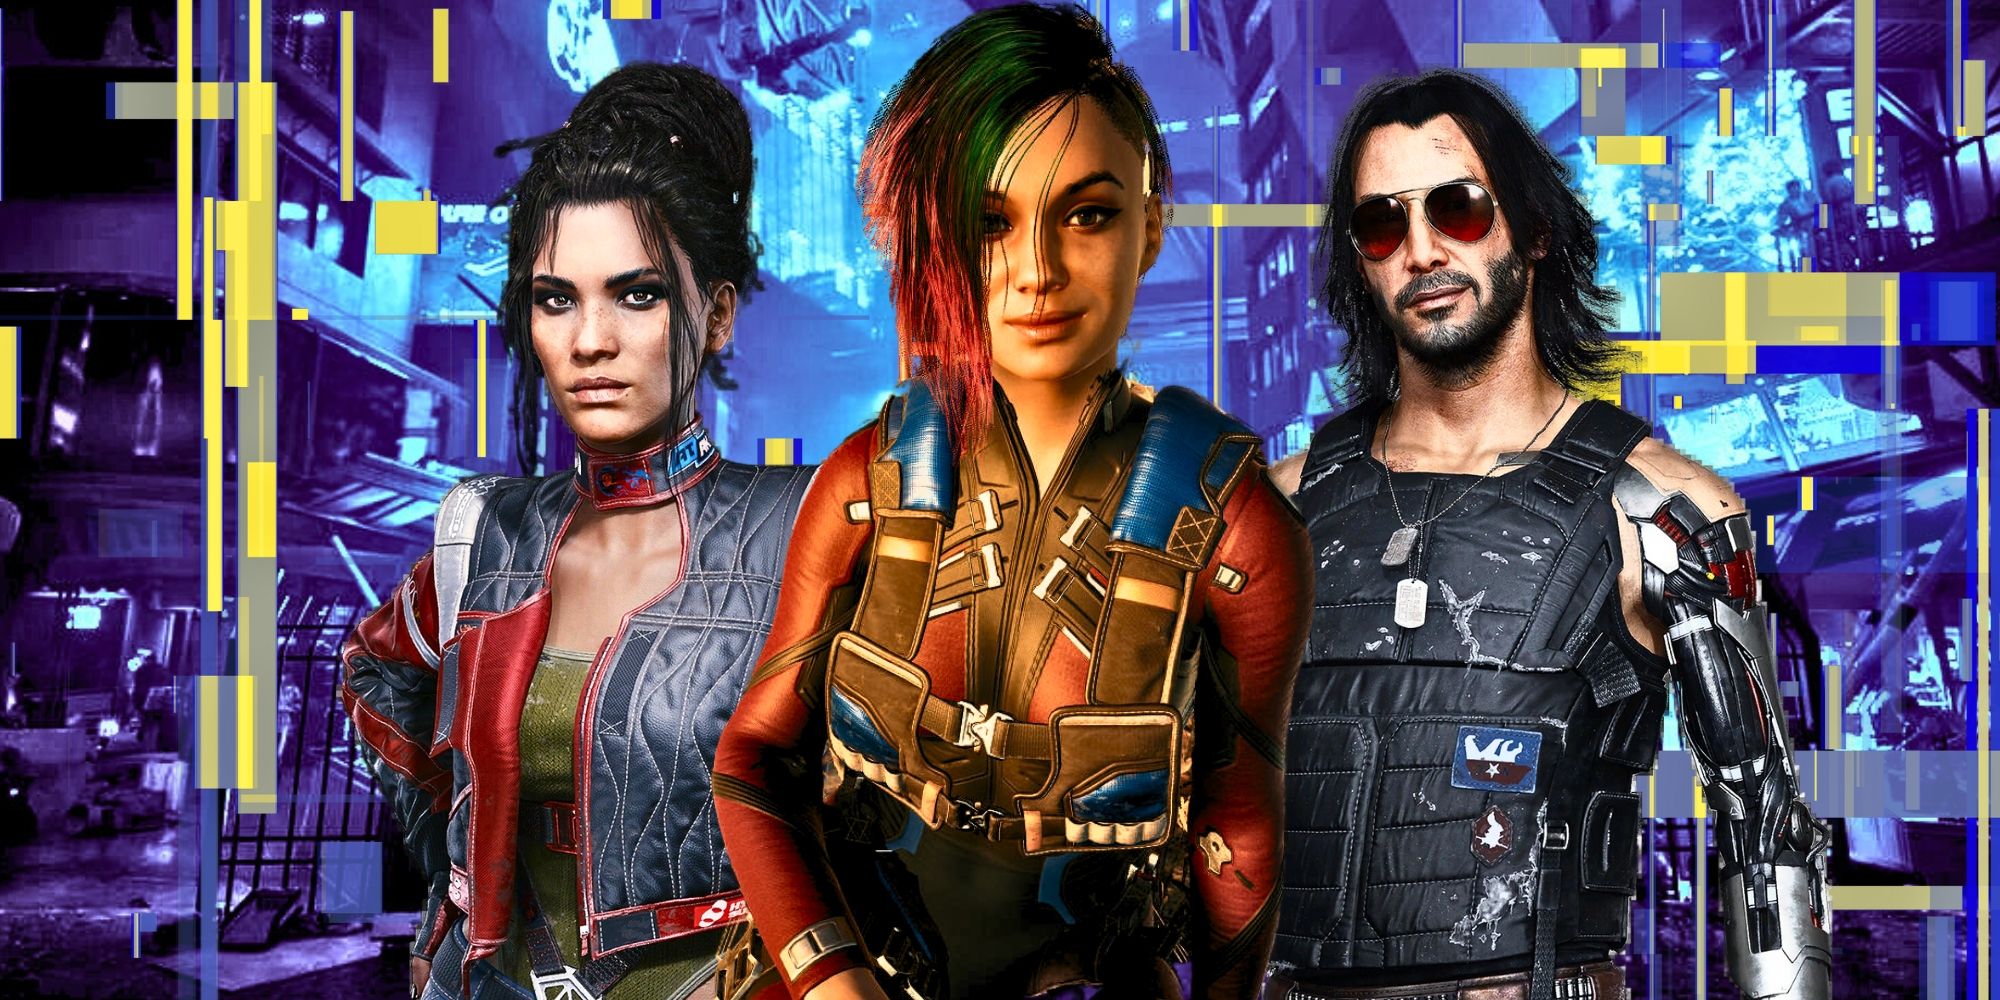 Johnny Silverhand, Panam, and Judy from Cyberpunk 2077